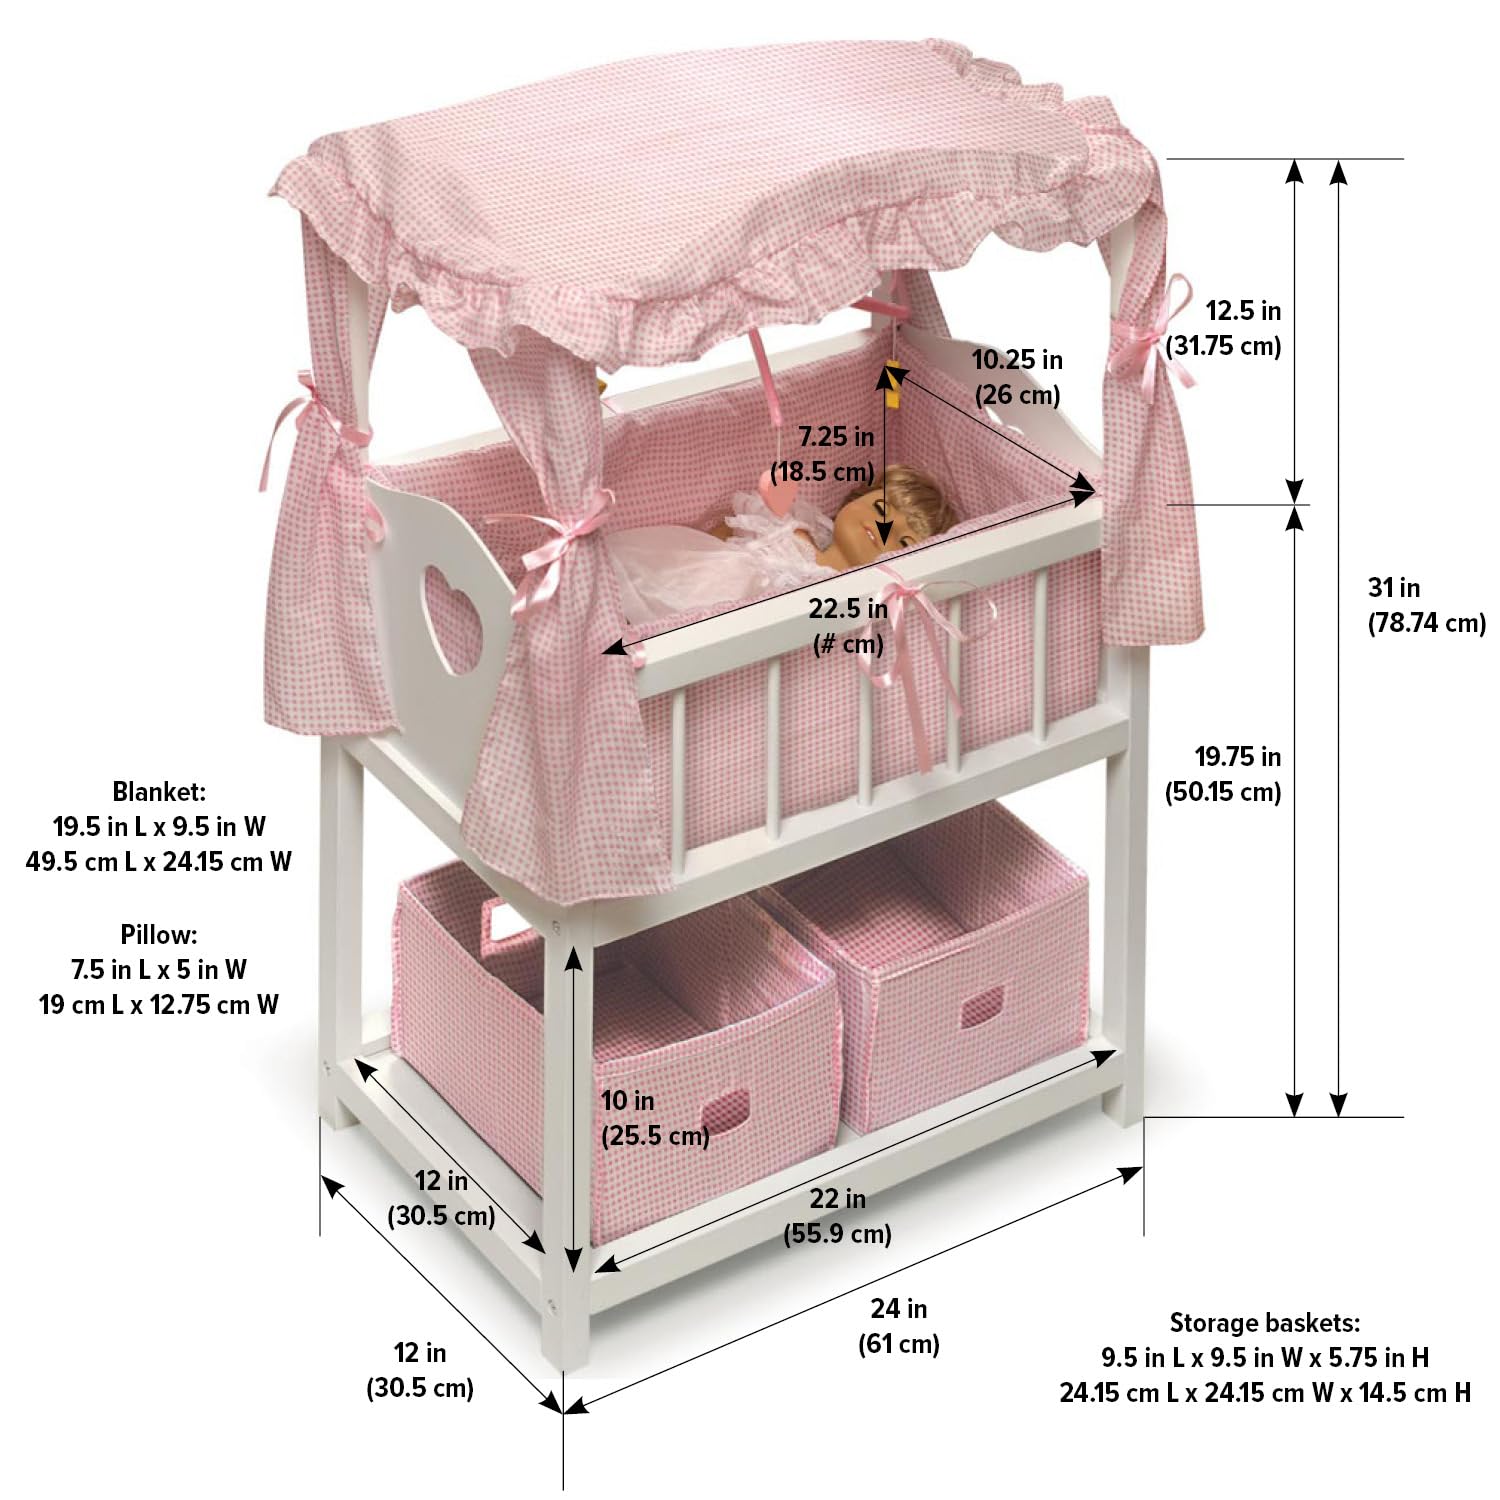 Badger Basket Toy Doll Bed with Storage Baskets, Gingham Bedding, and Musical Mobile for 22 inch Dolls - White/Pink